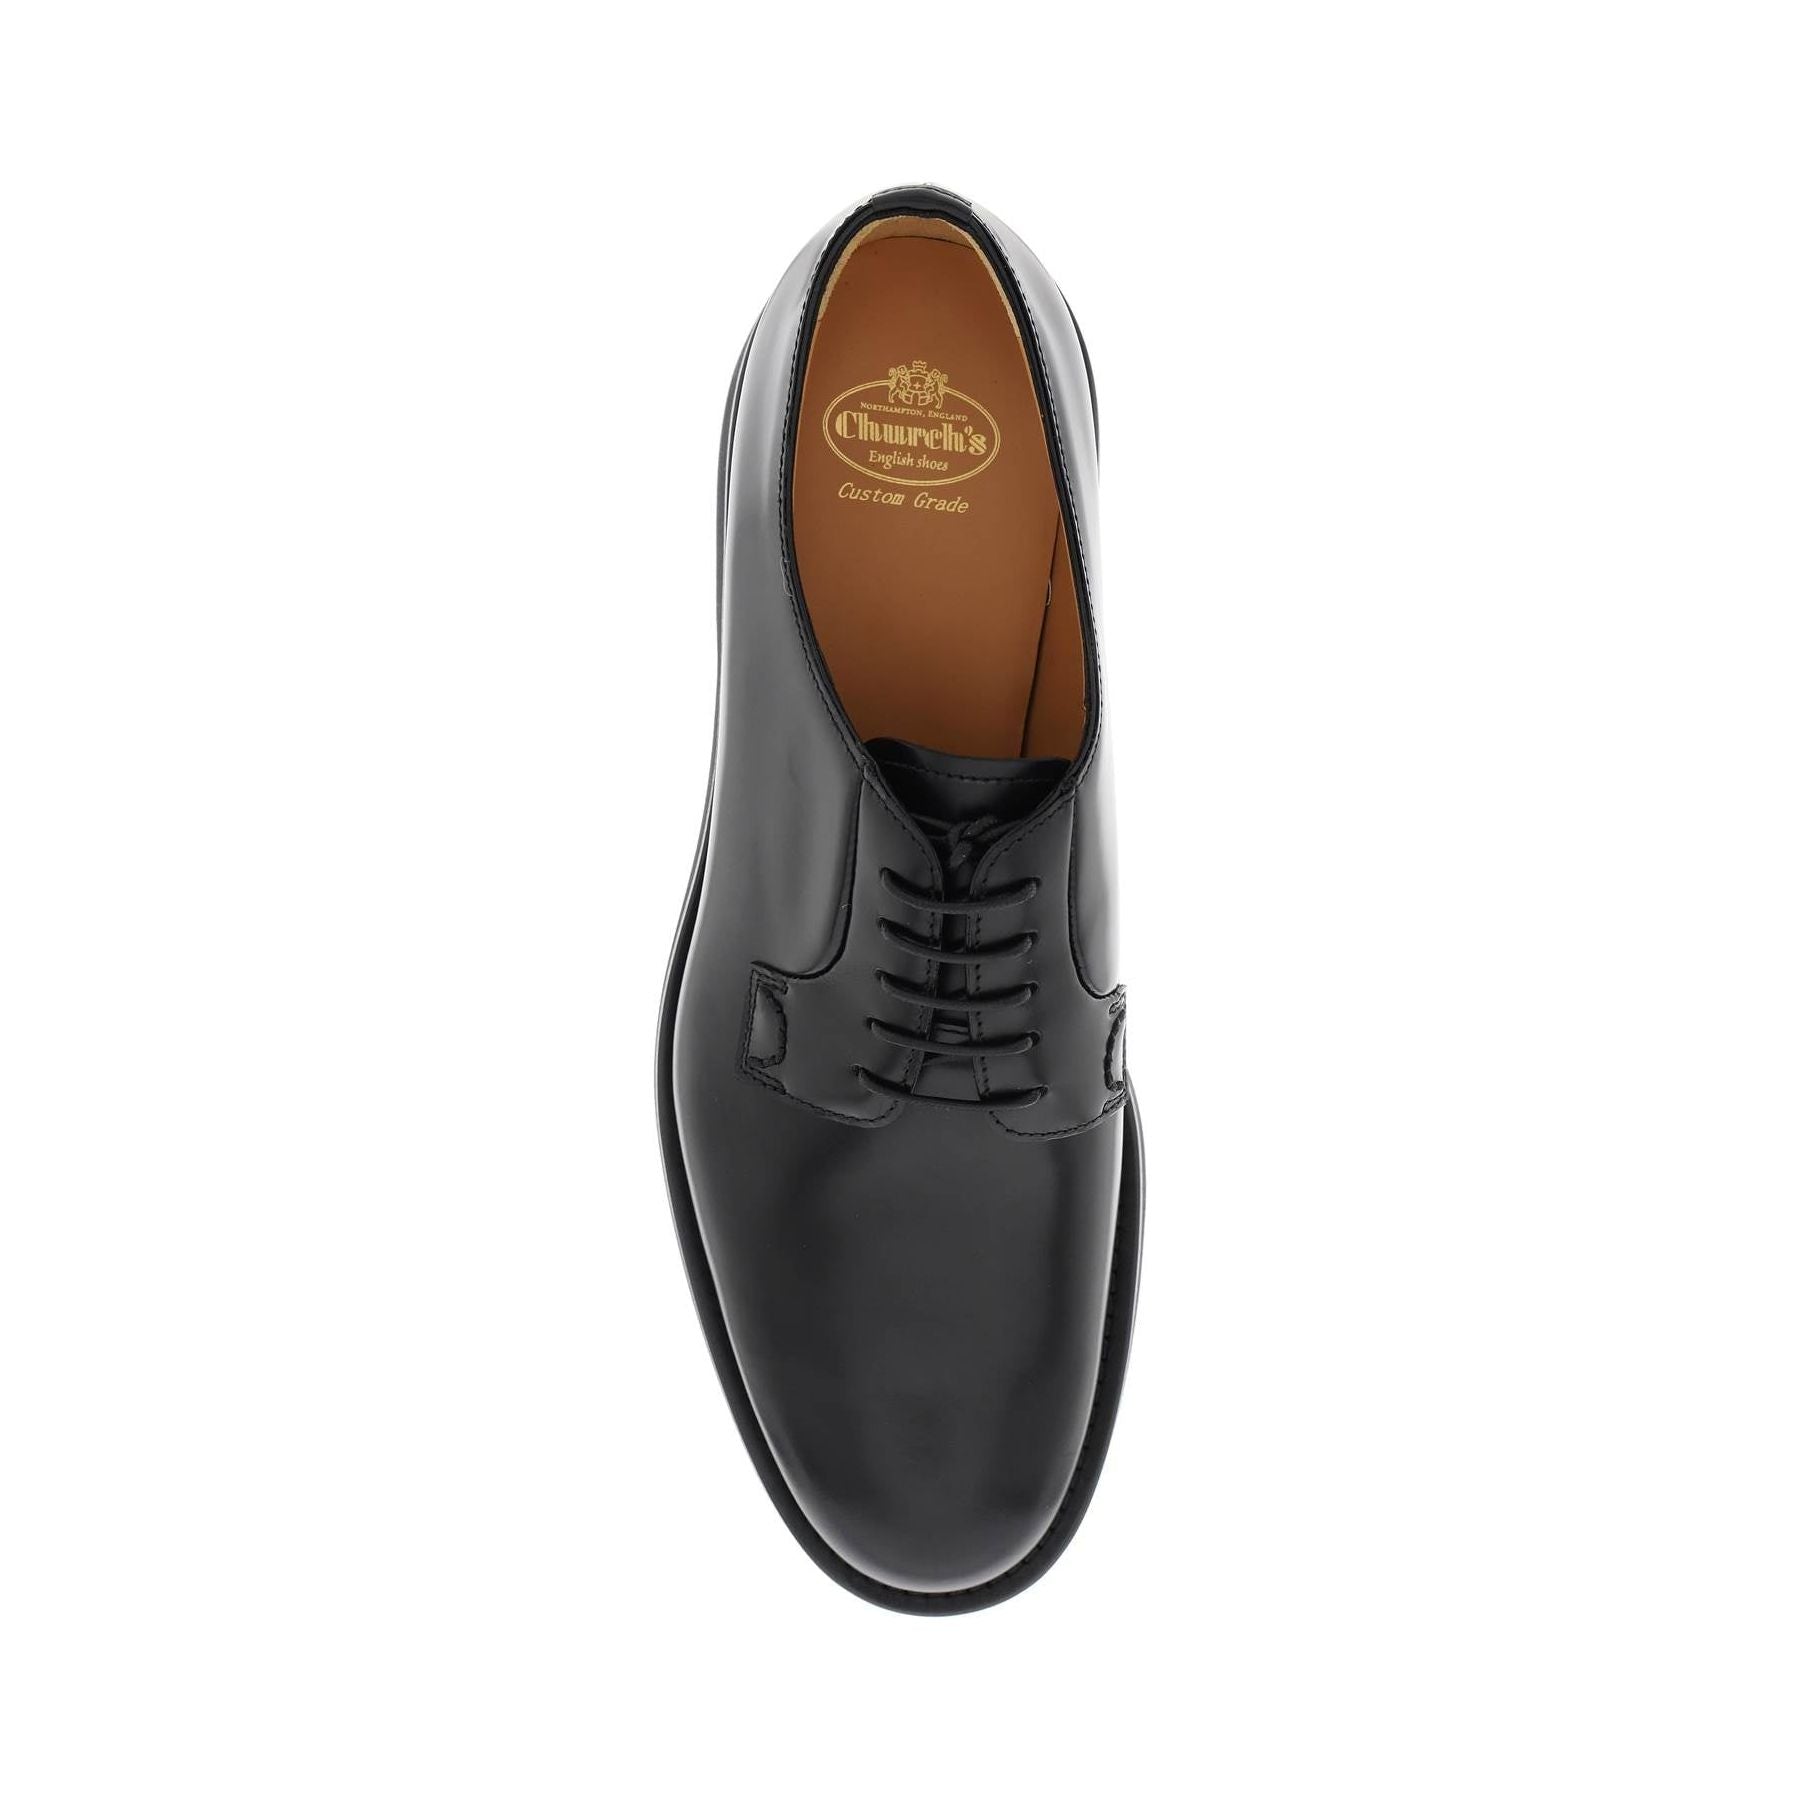 Leather Shannon Derby Shoes